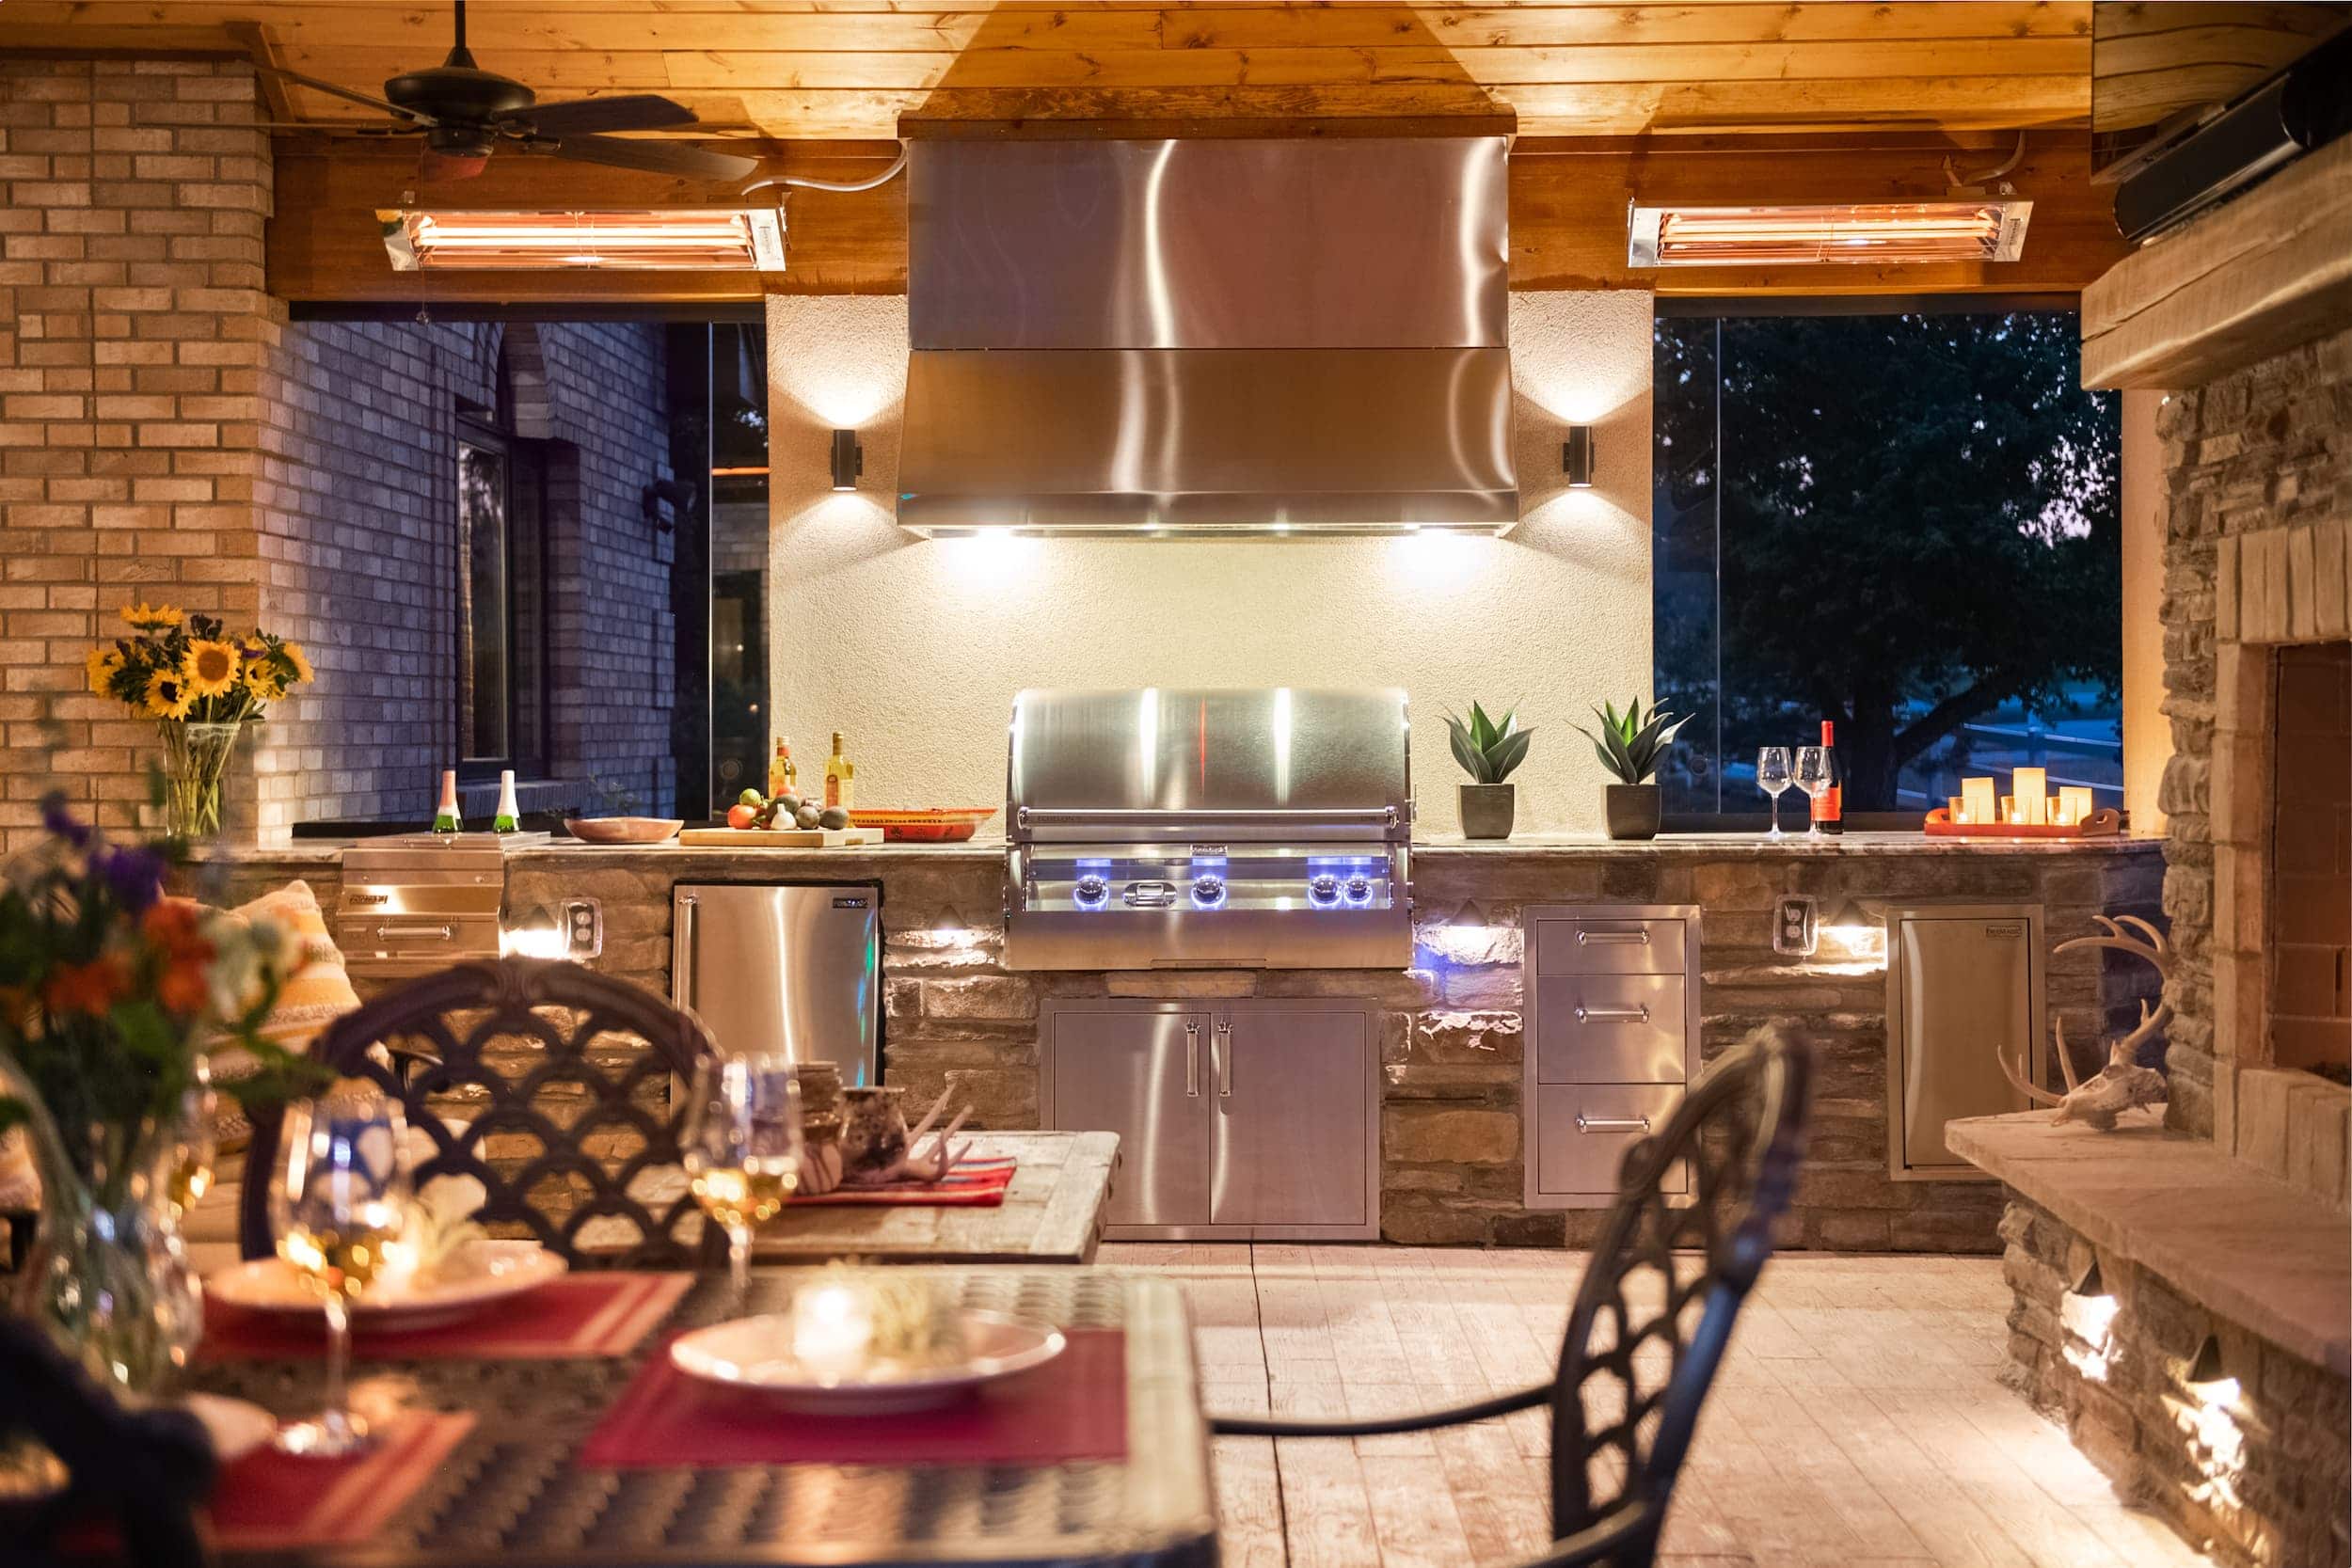 An outdoor kitchen with a fireplace and dining table.